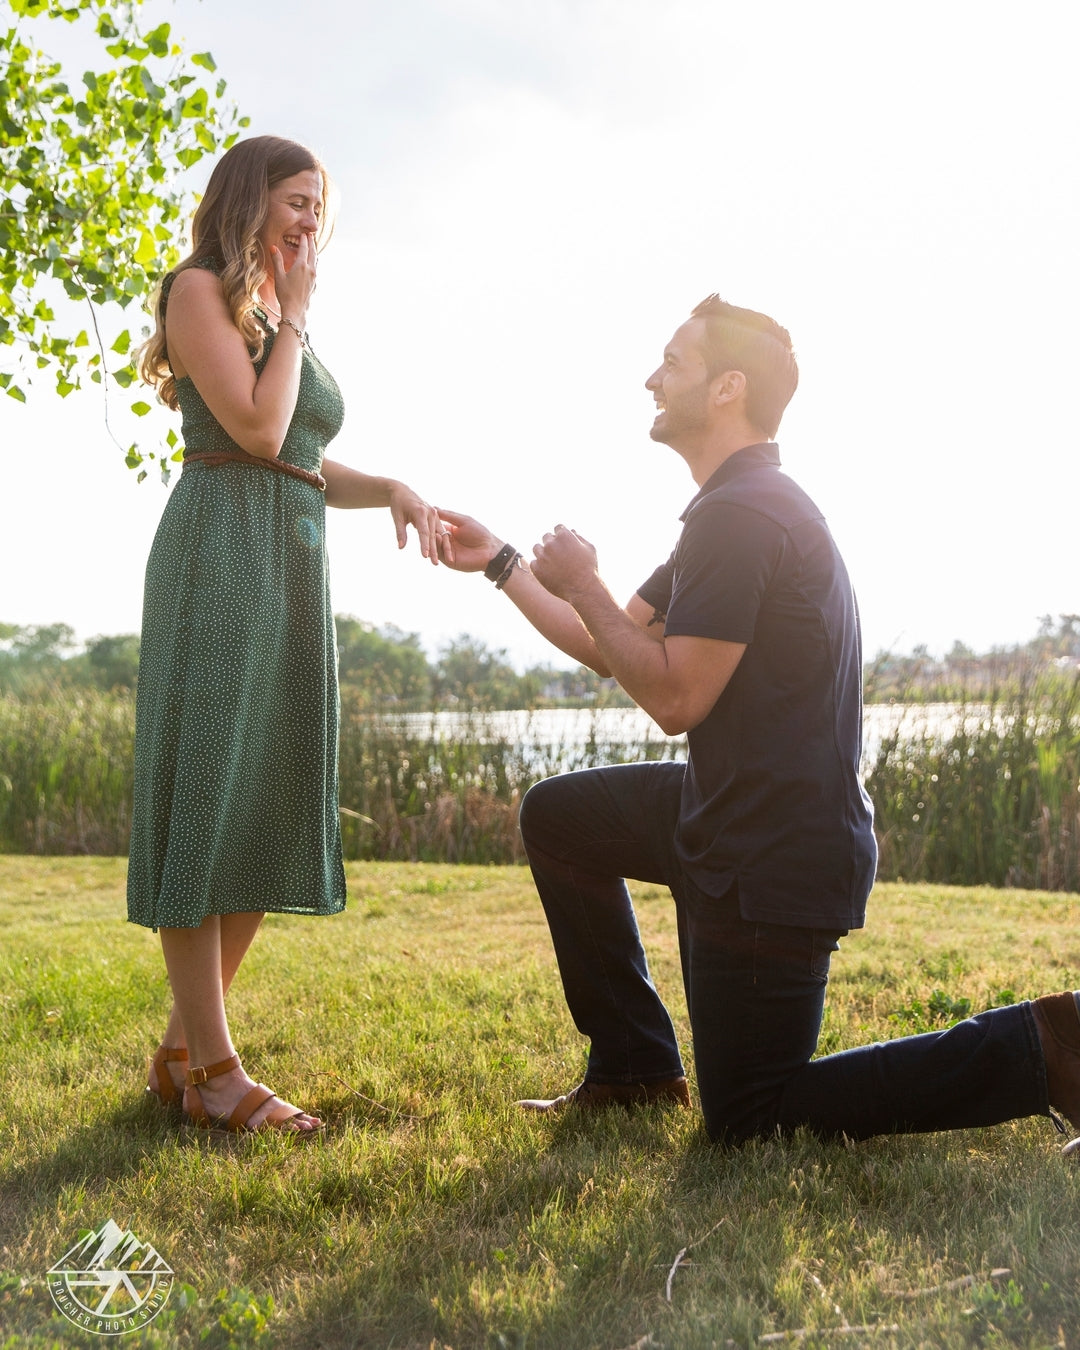 man proposing in a romantic and memorable setting outdoors